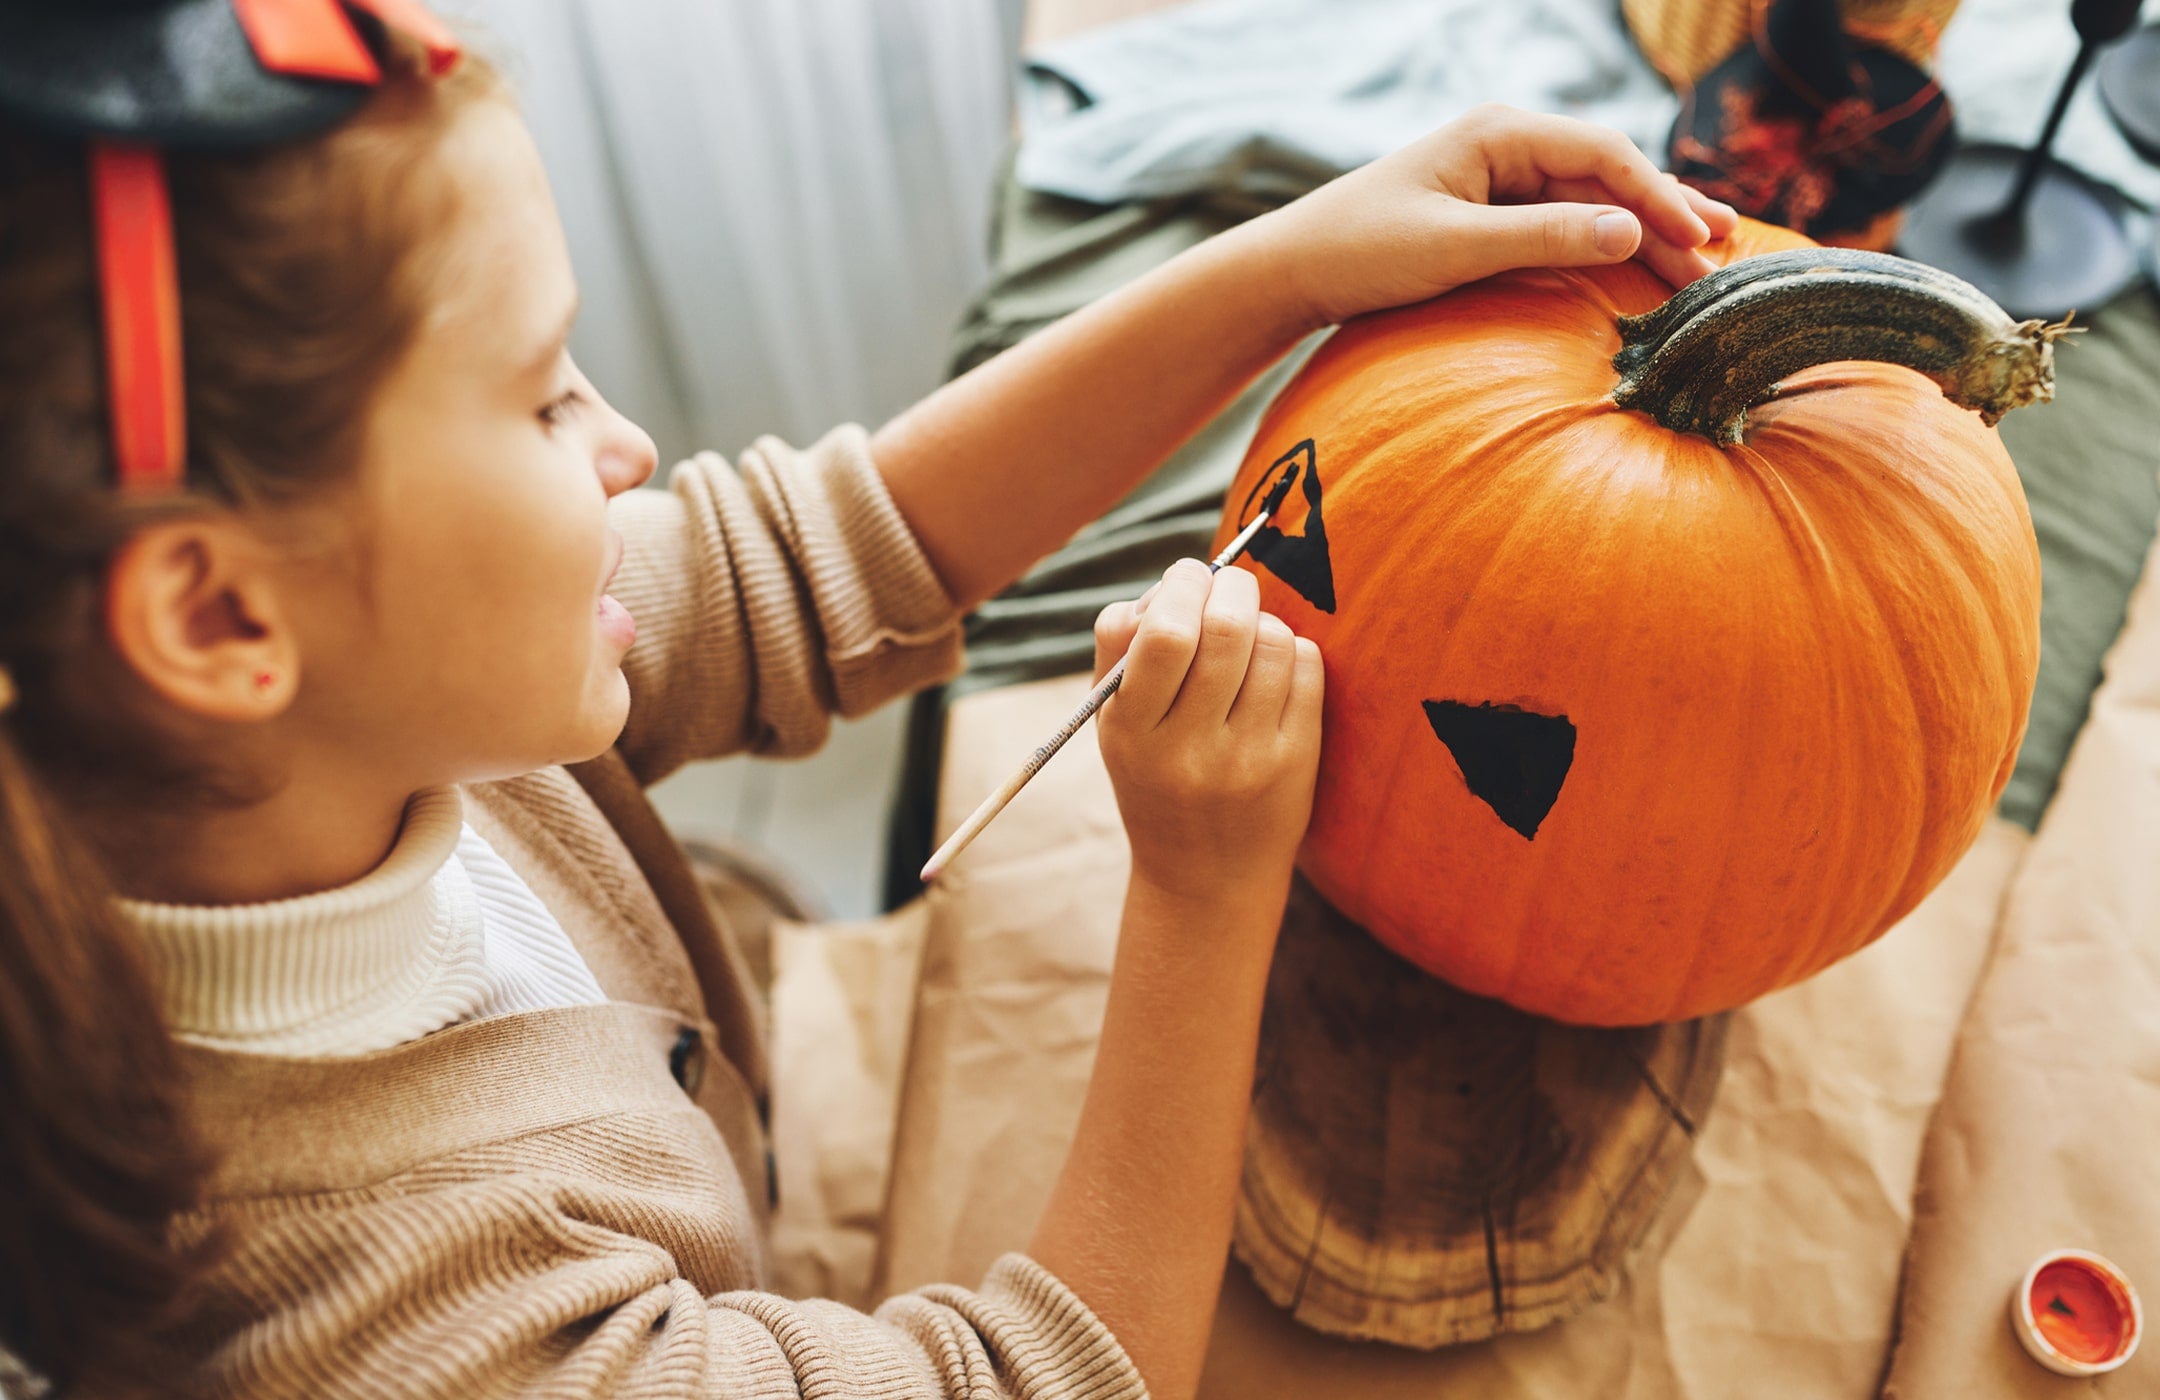 15 Seasonal Activities to Do With Your Kids This Fall